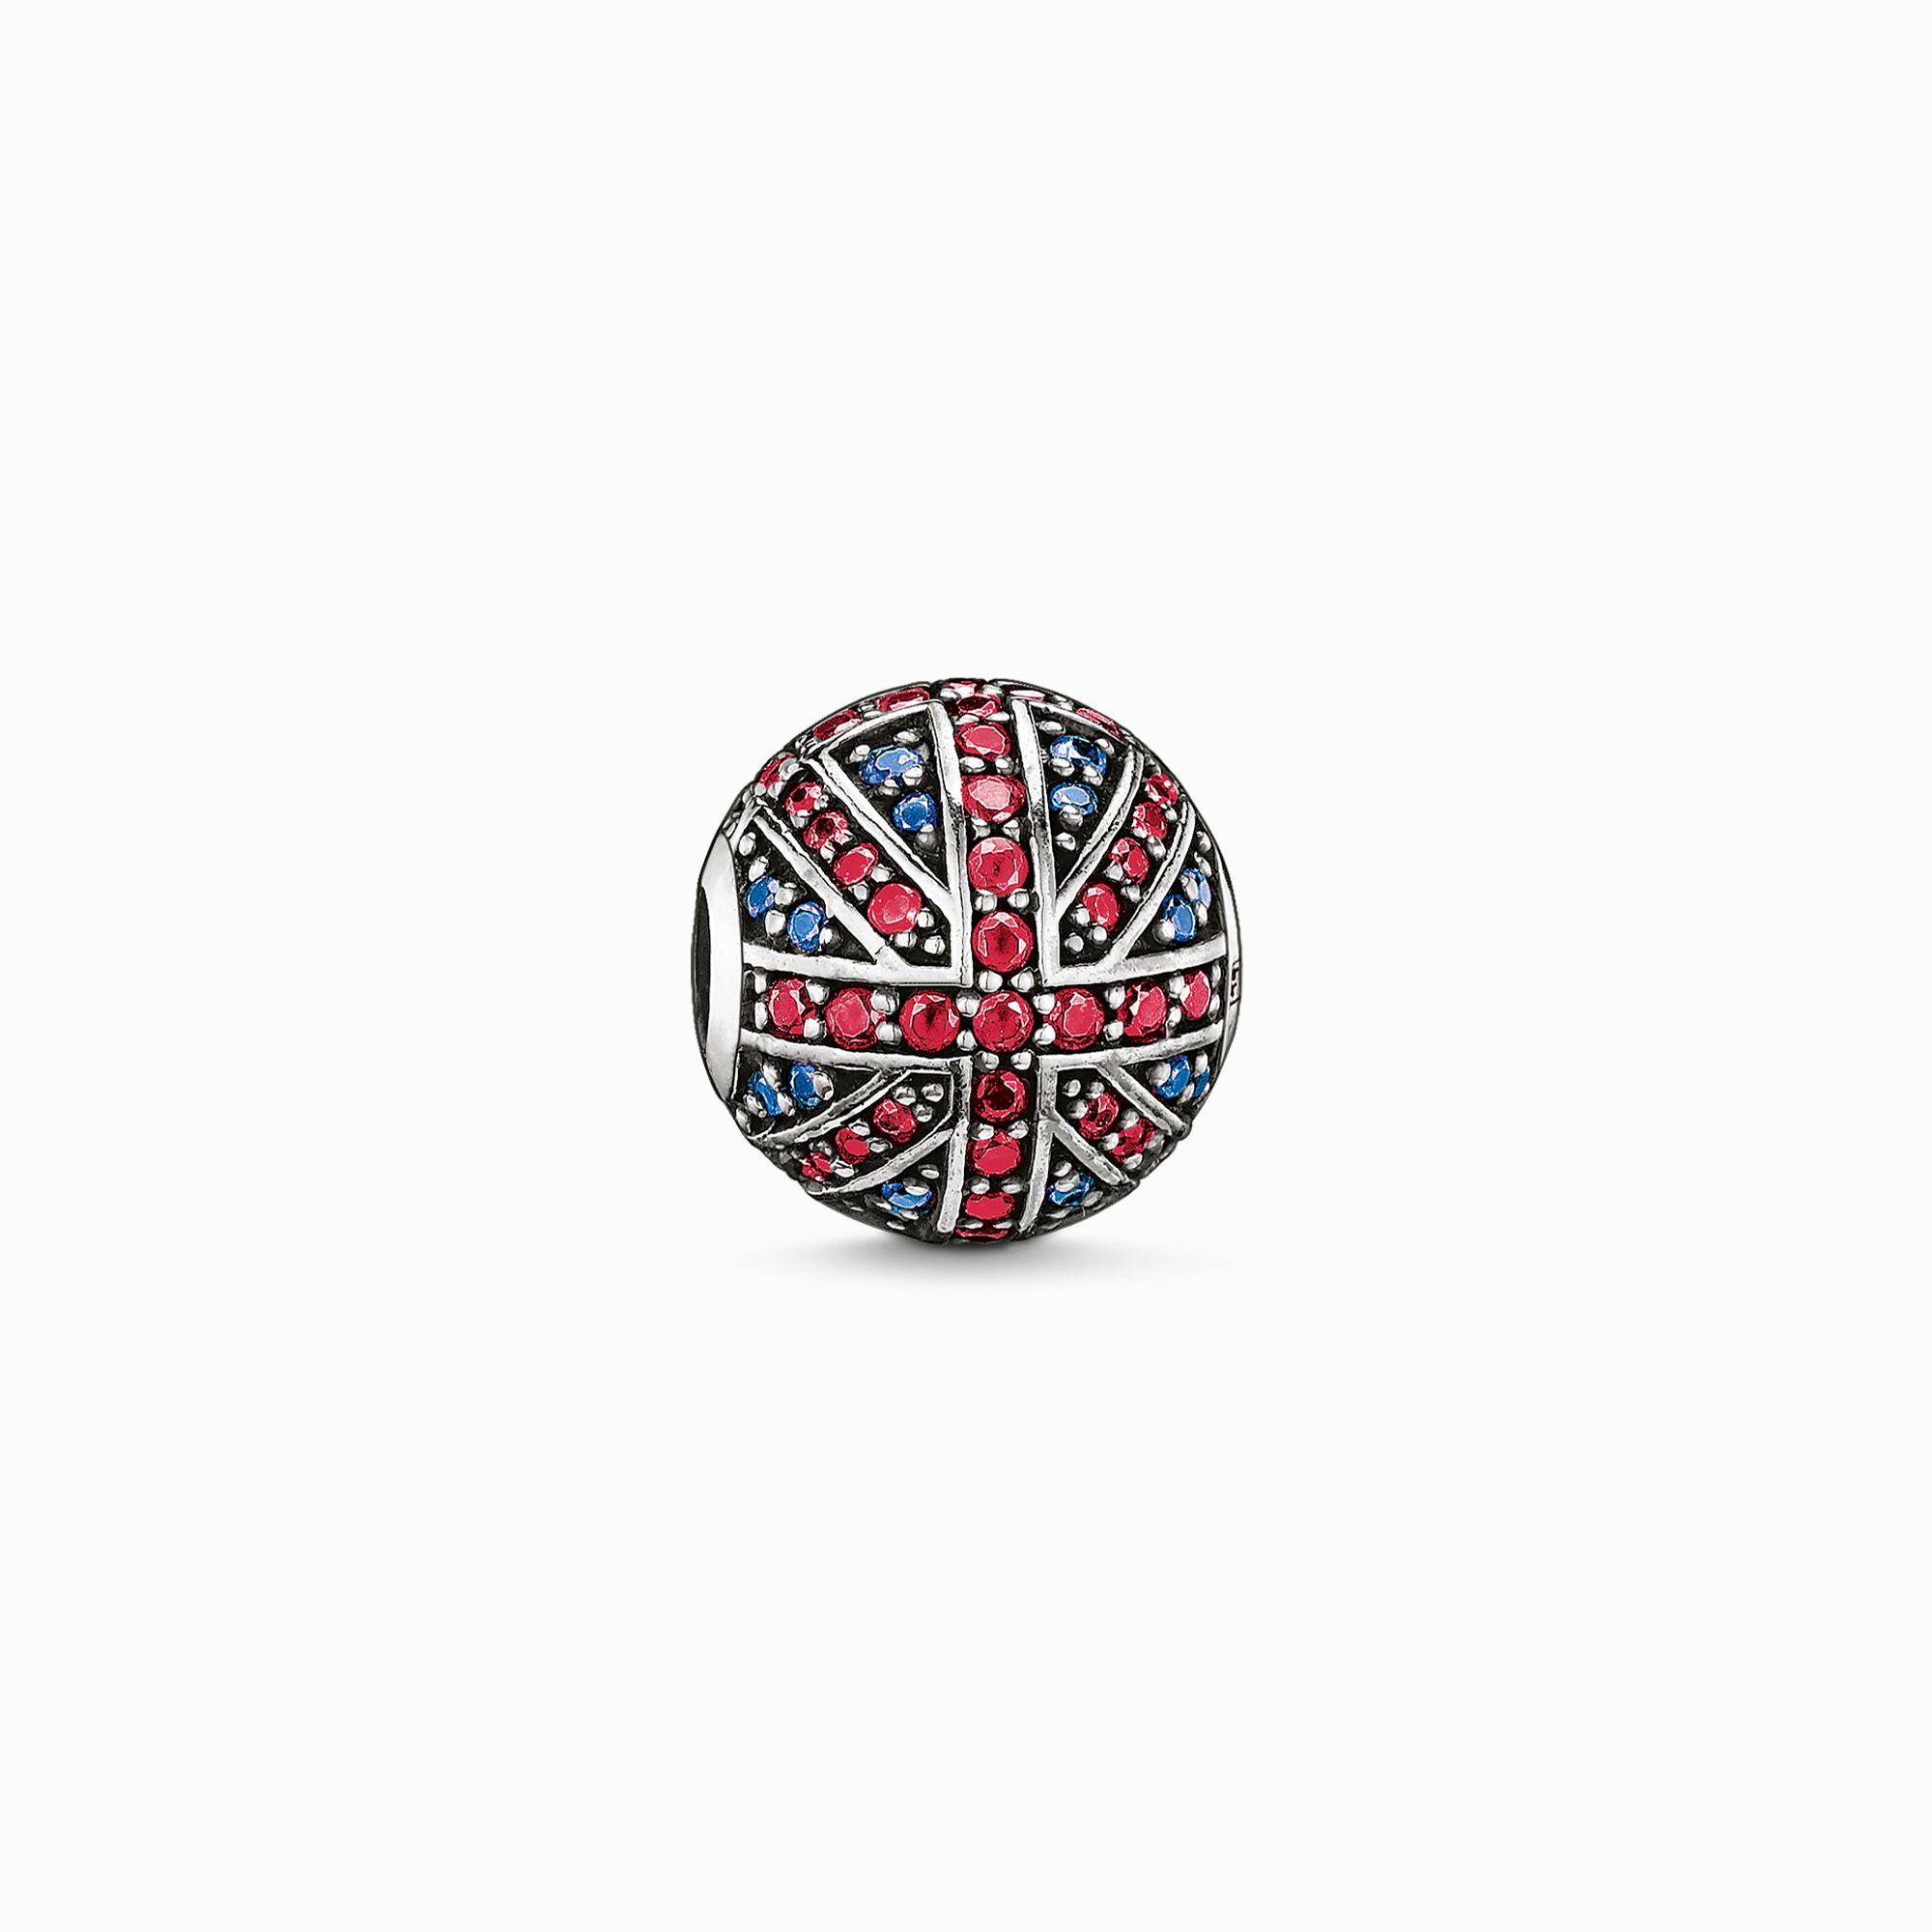 Bead Brit from the Karma Beads collection in the THOMAS SABO online store